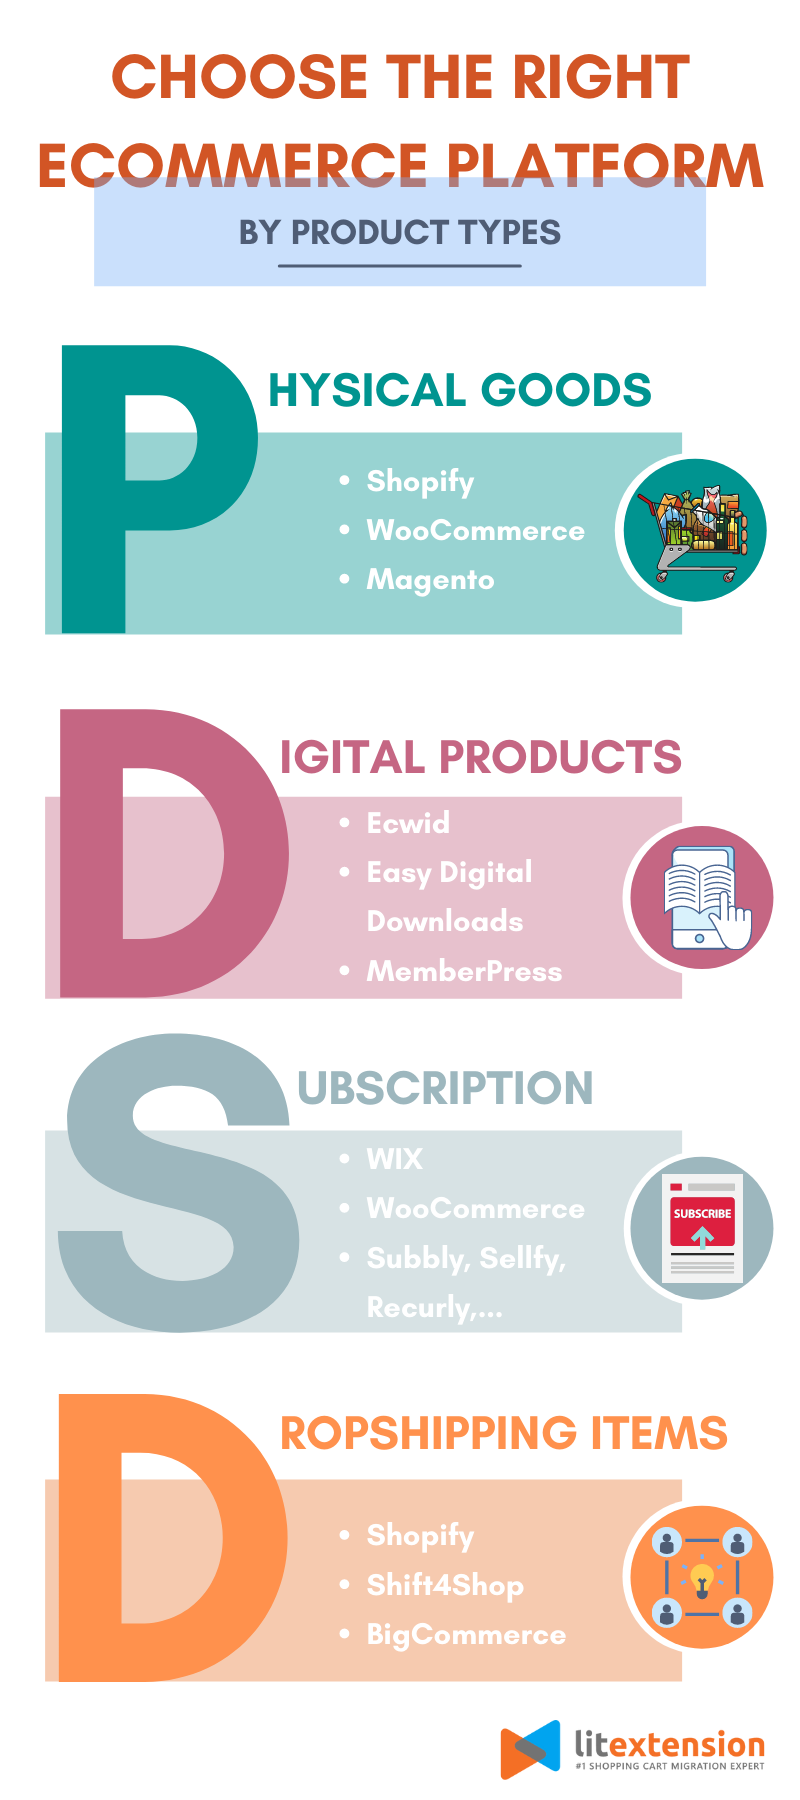 Choose the right eCommerce platform by product types 